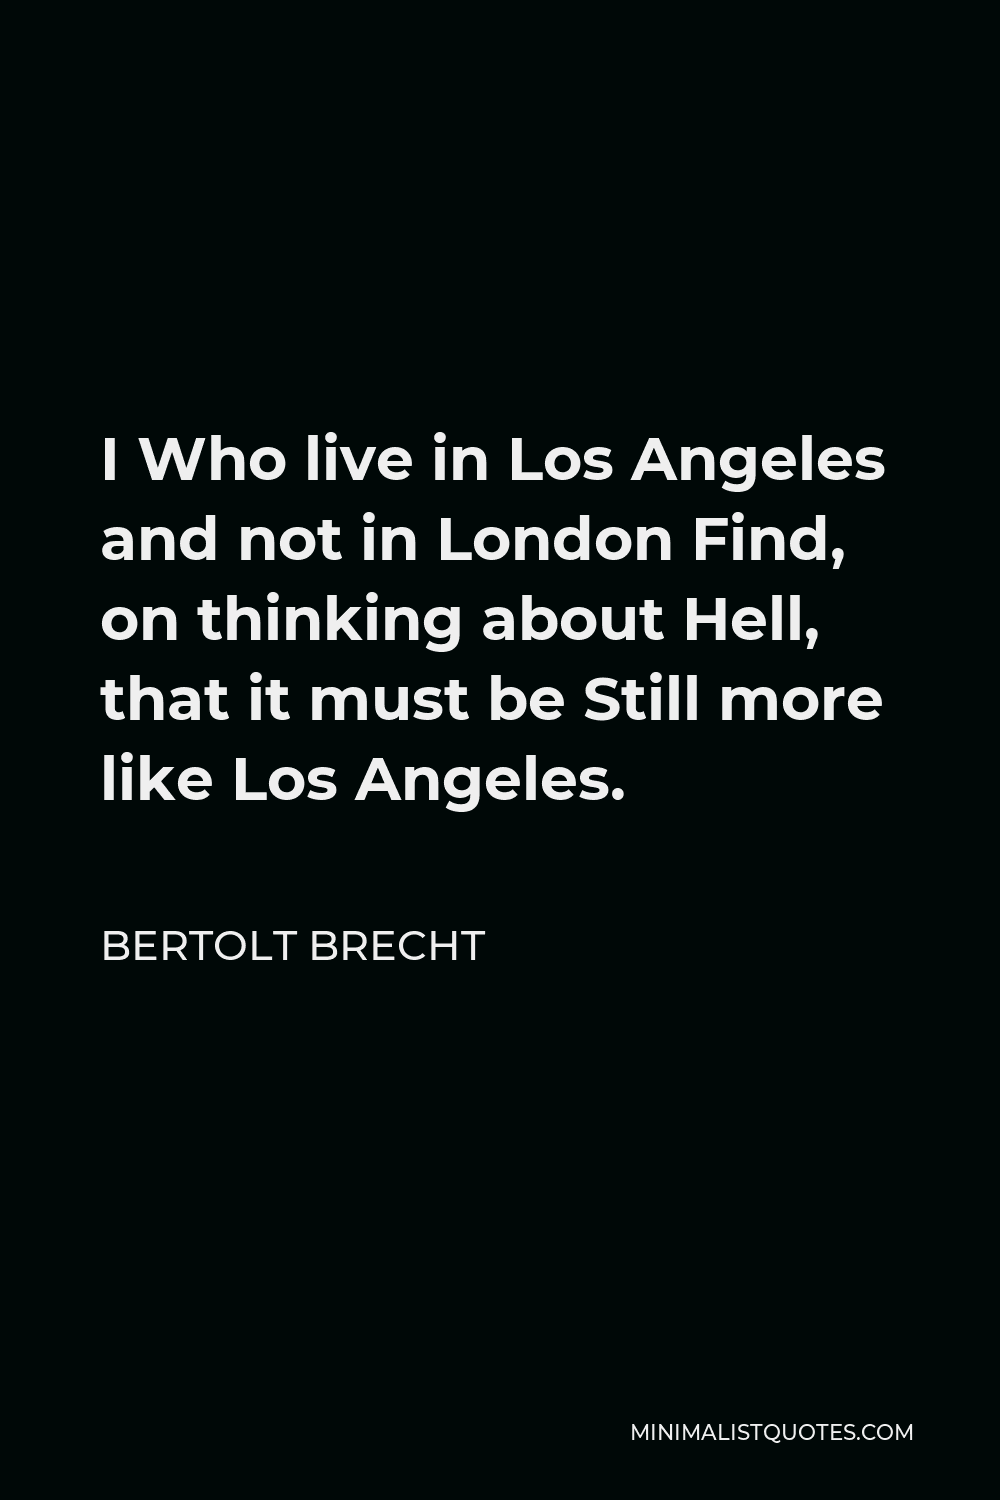 Bertolt Brecht Quote - I Who live in Los Angeles and not in London Find, on thinking about Hell, that it must be Still more like Los Angeles.